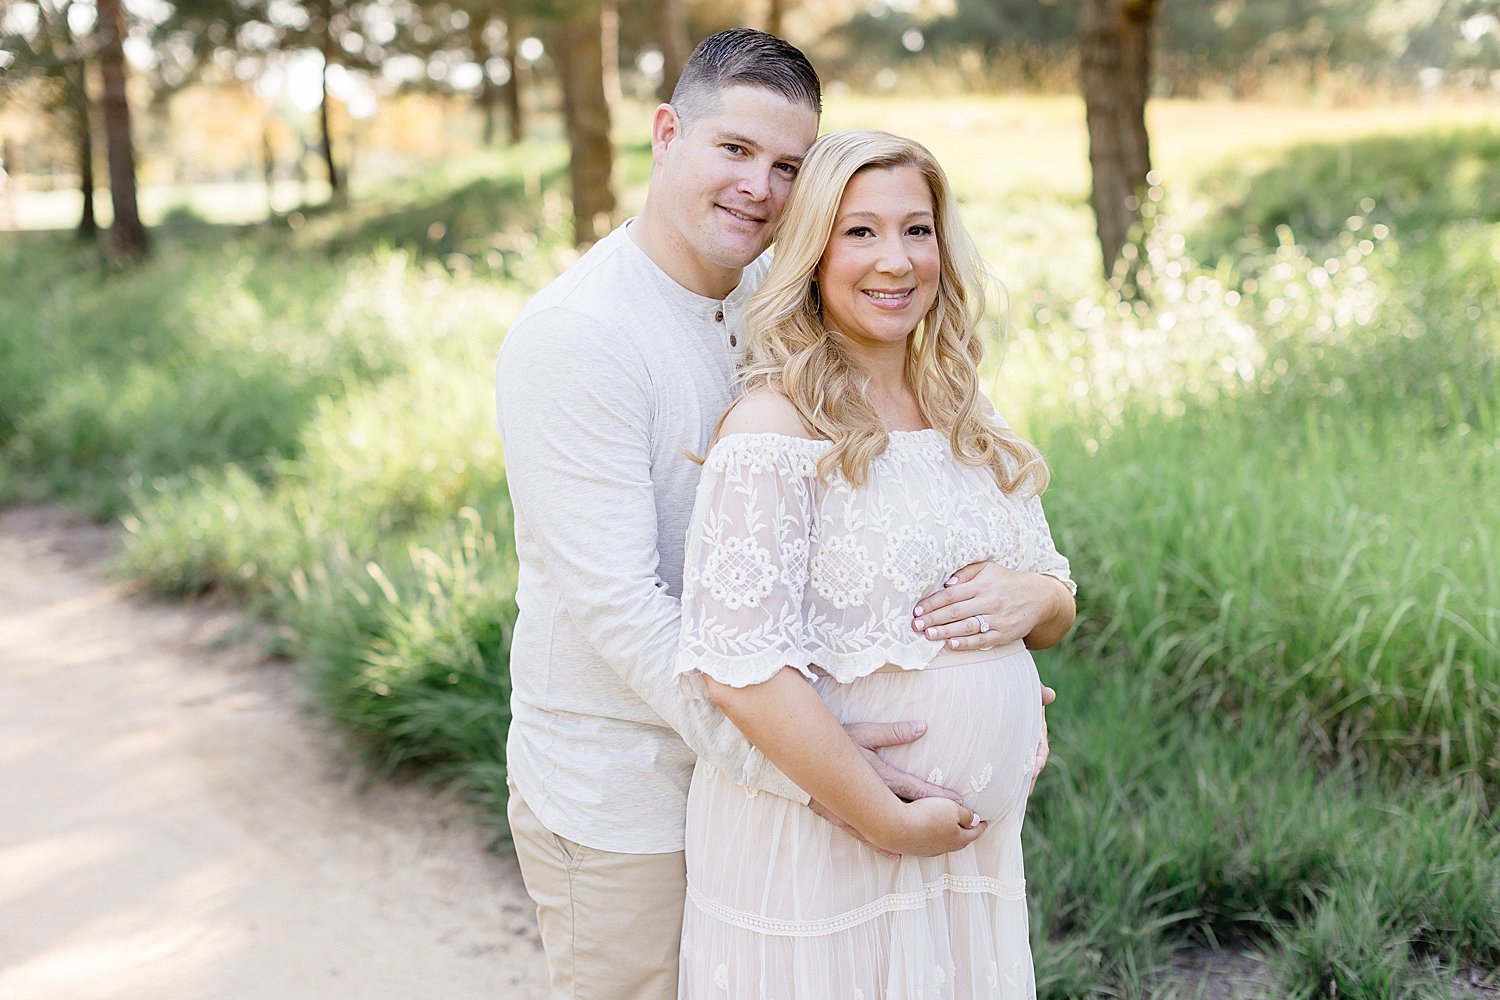 Maternity photoshoot in Irvine at the Jeffrey Open Space Trail. Photo by Ambre Williams Photography.